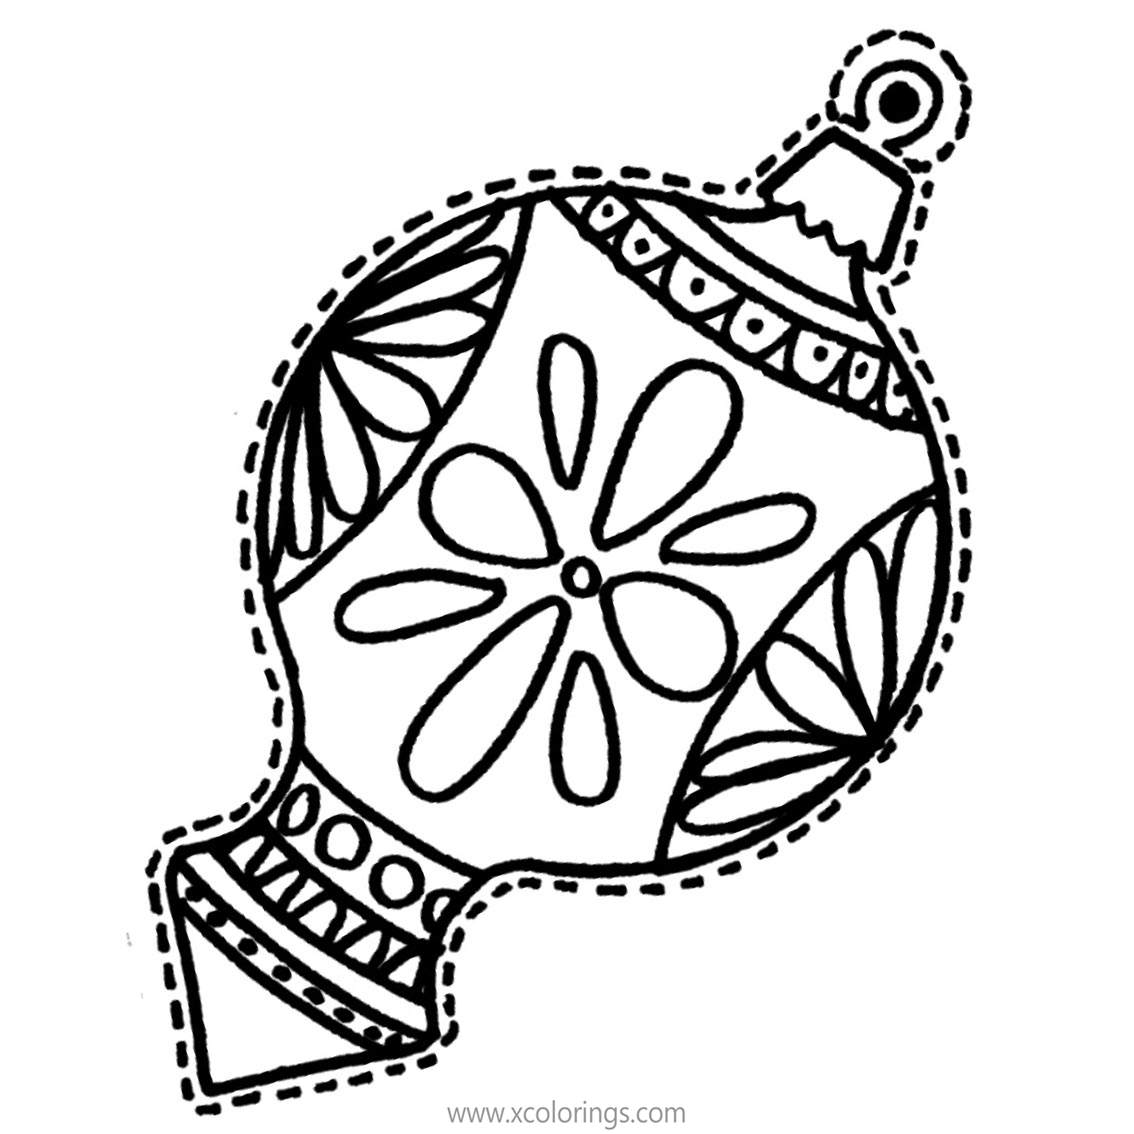 Free Christmas Ornament Template Coloring Pages printable